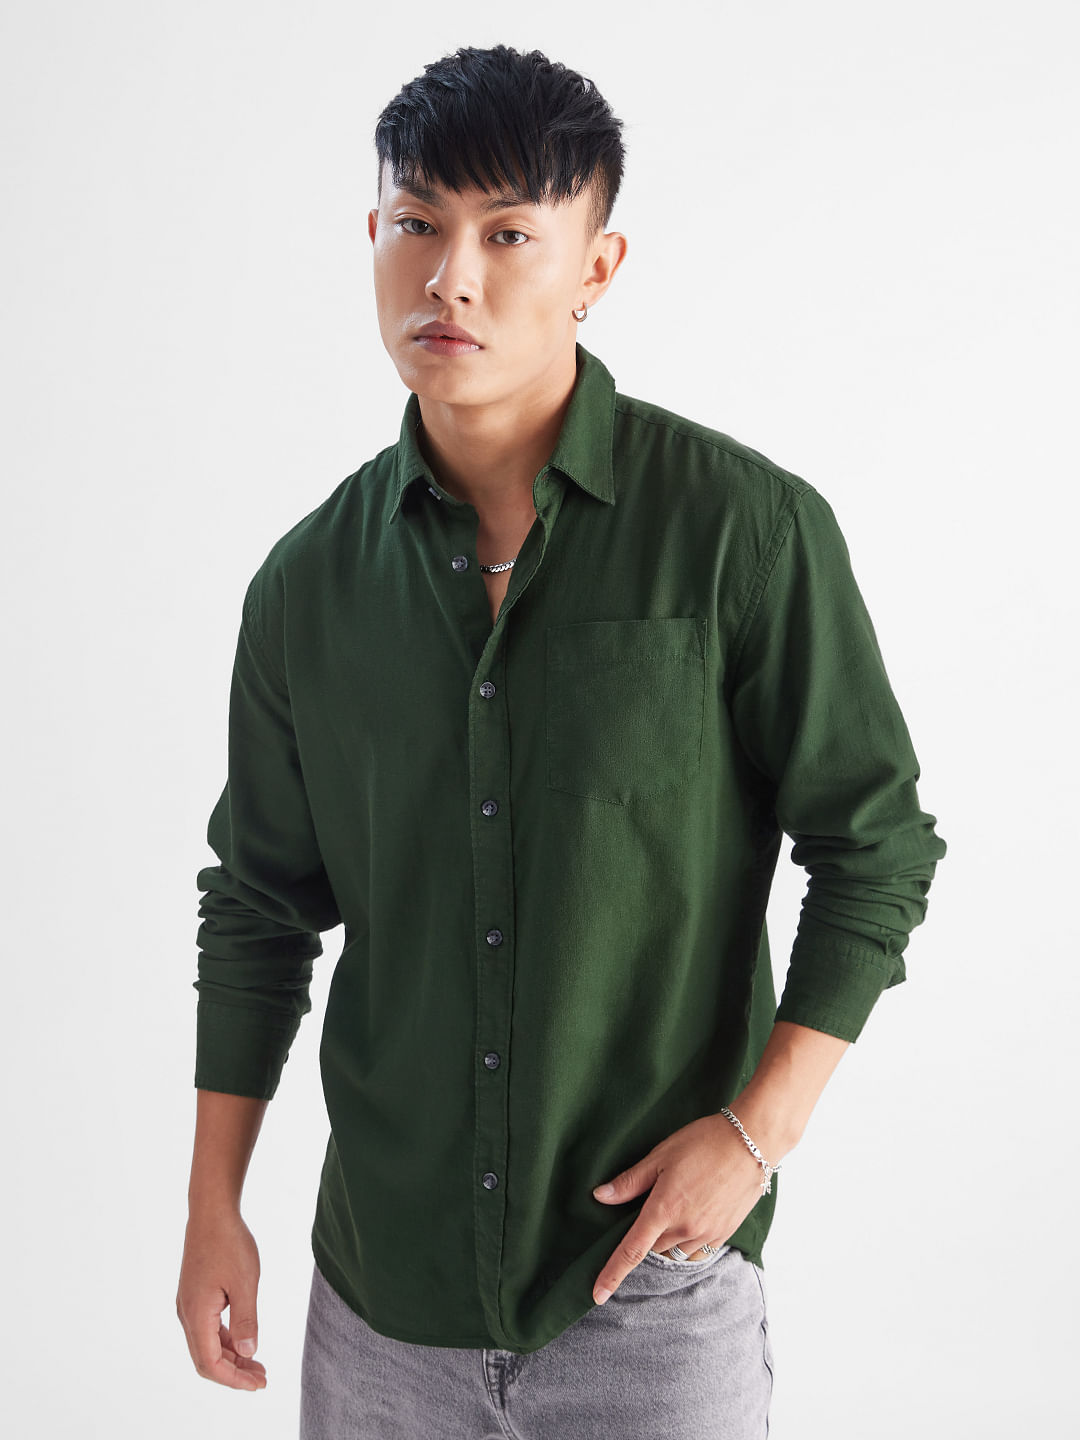 Buy Solids: Olive Men Full Sleeve Shirt Online at The Souled Store.